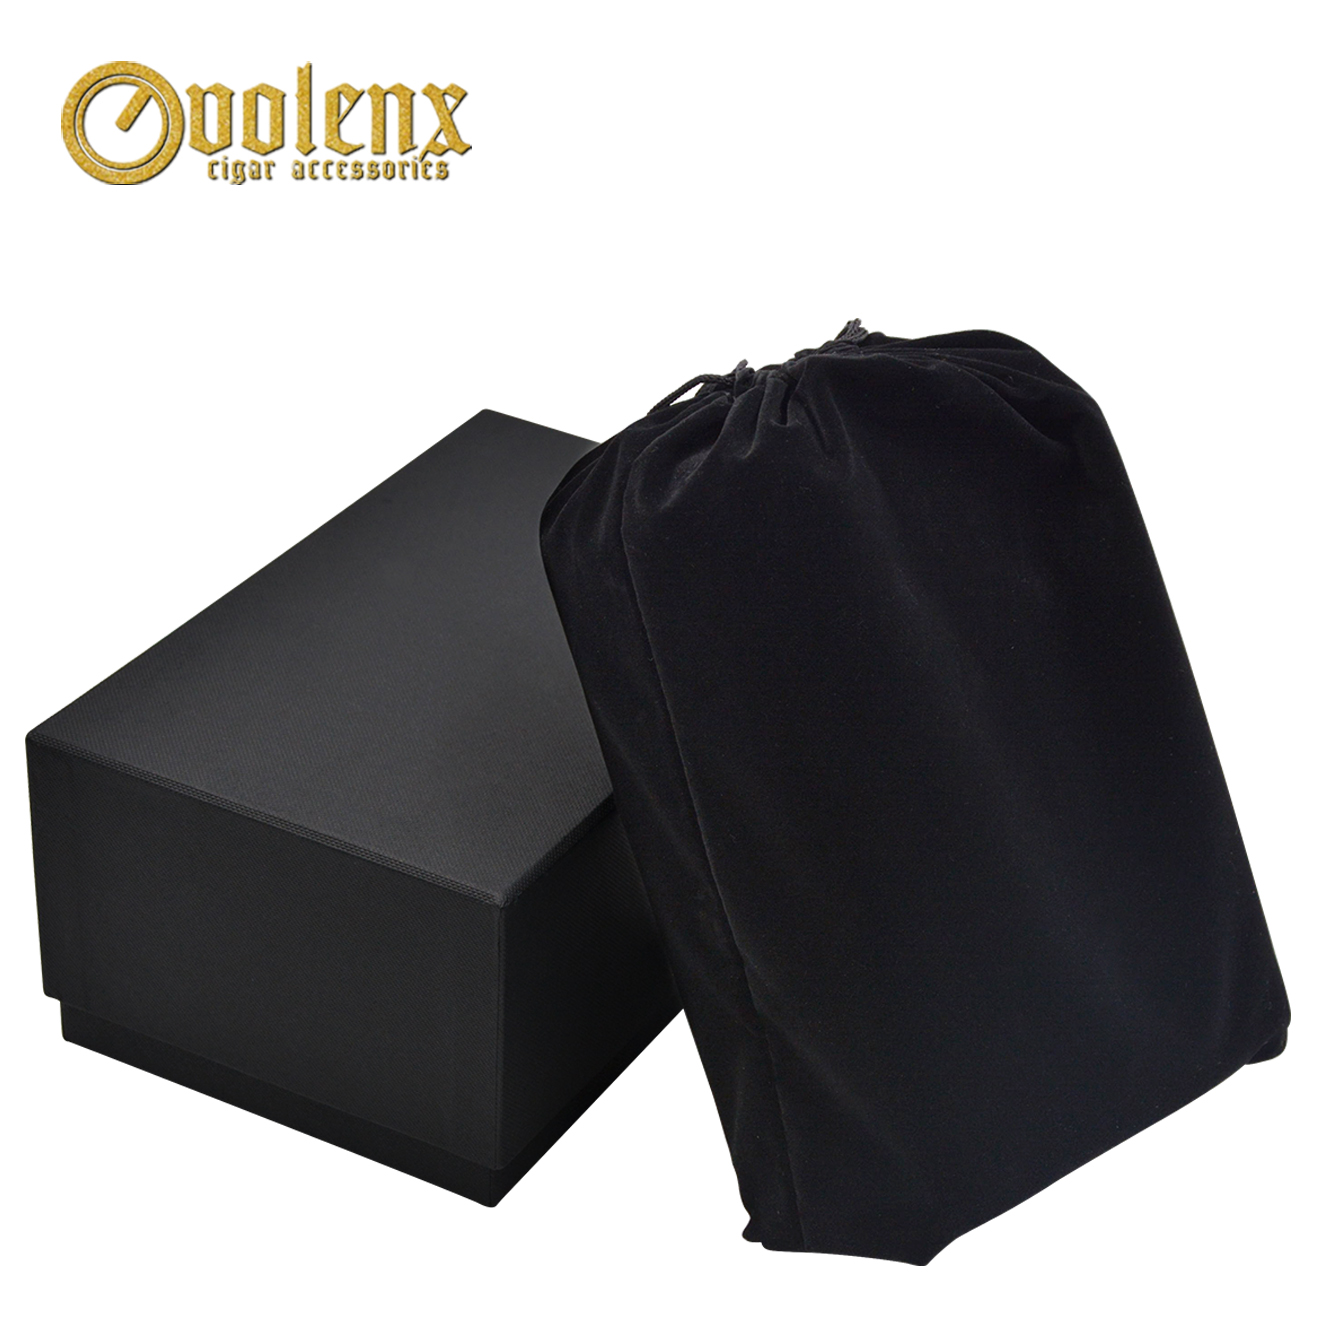  High Quality Leather Cigar Case 8